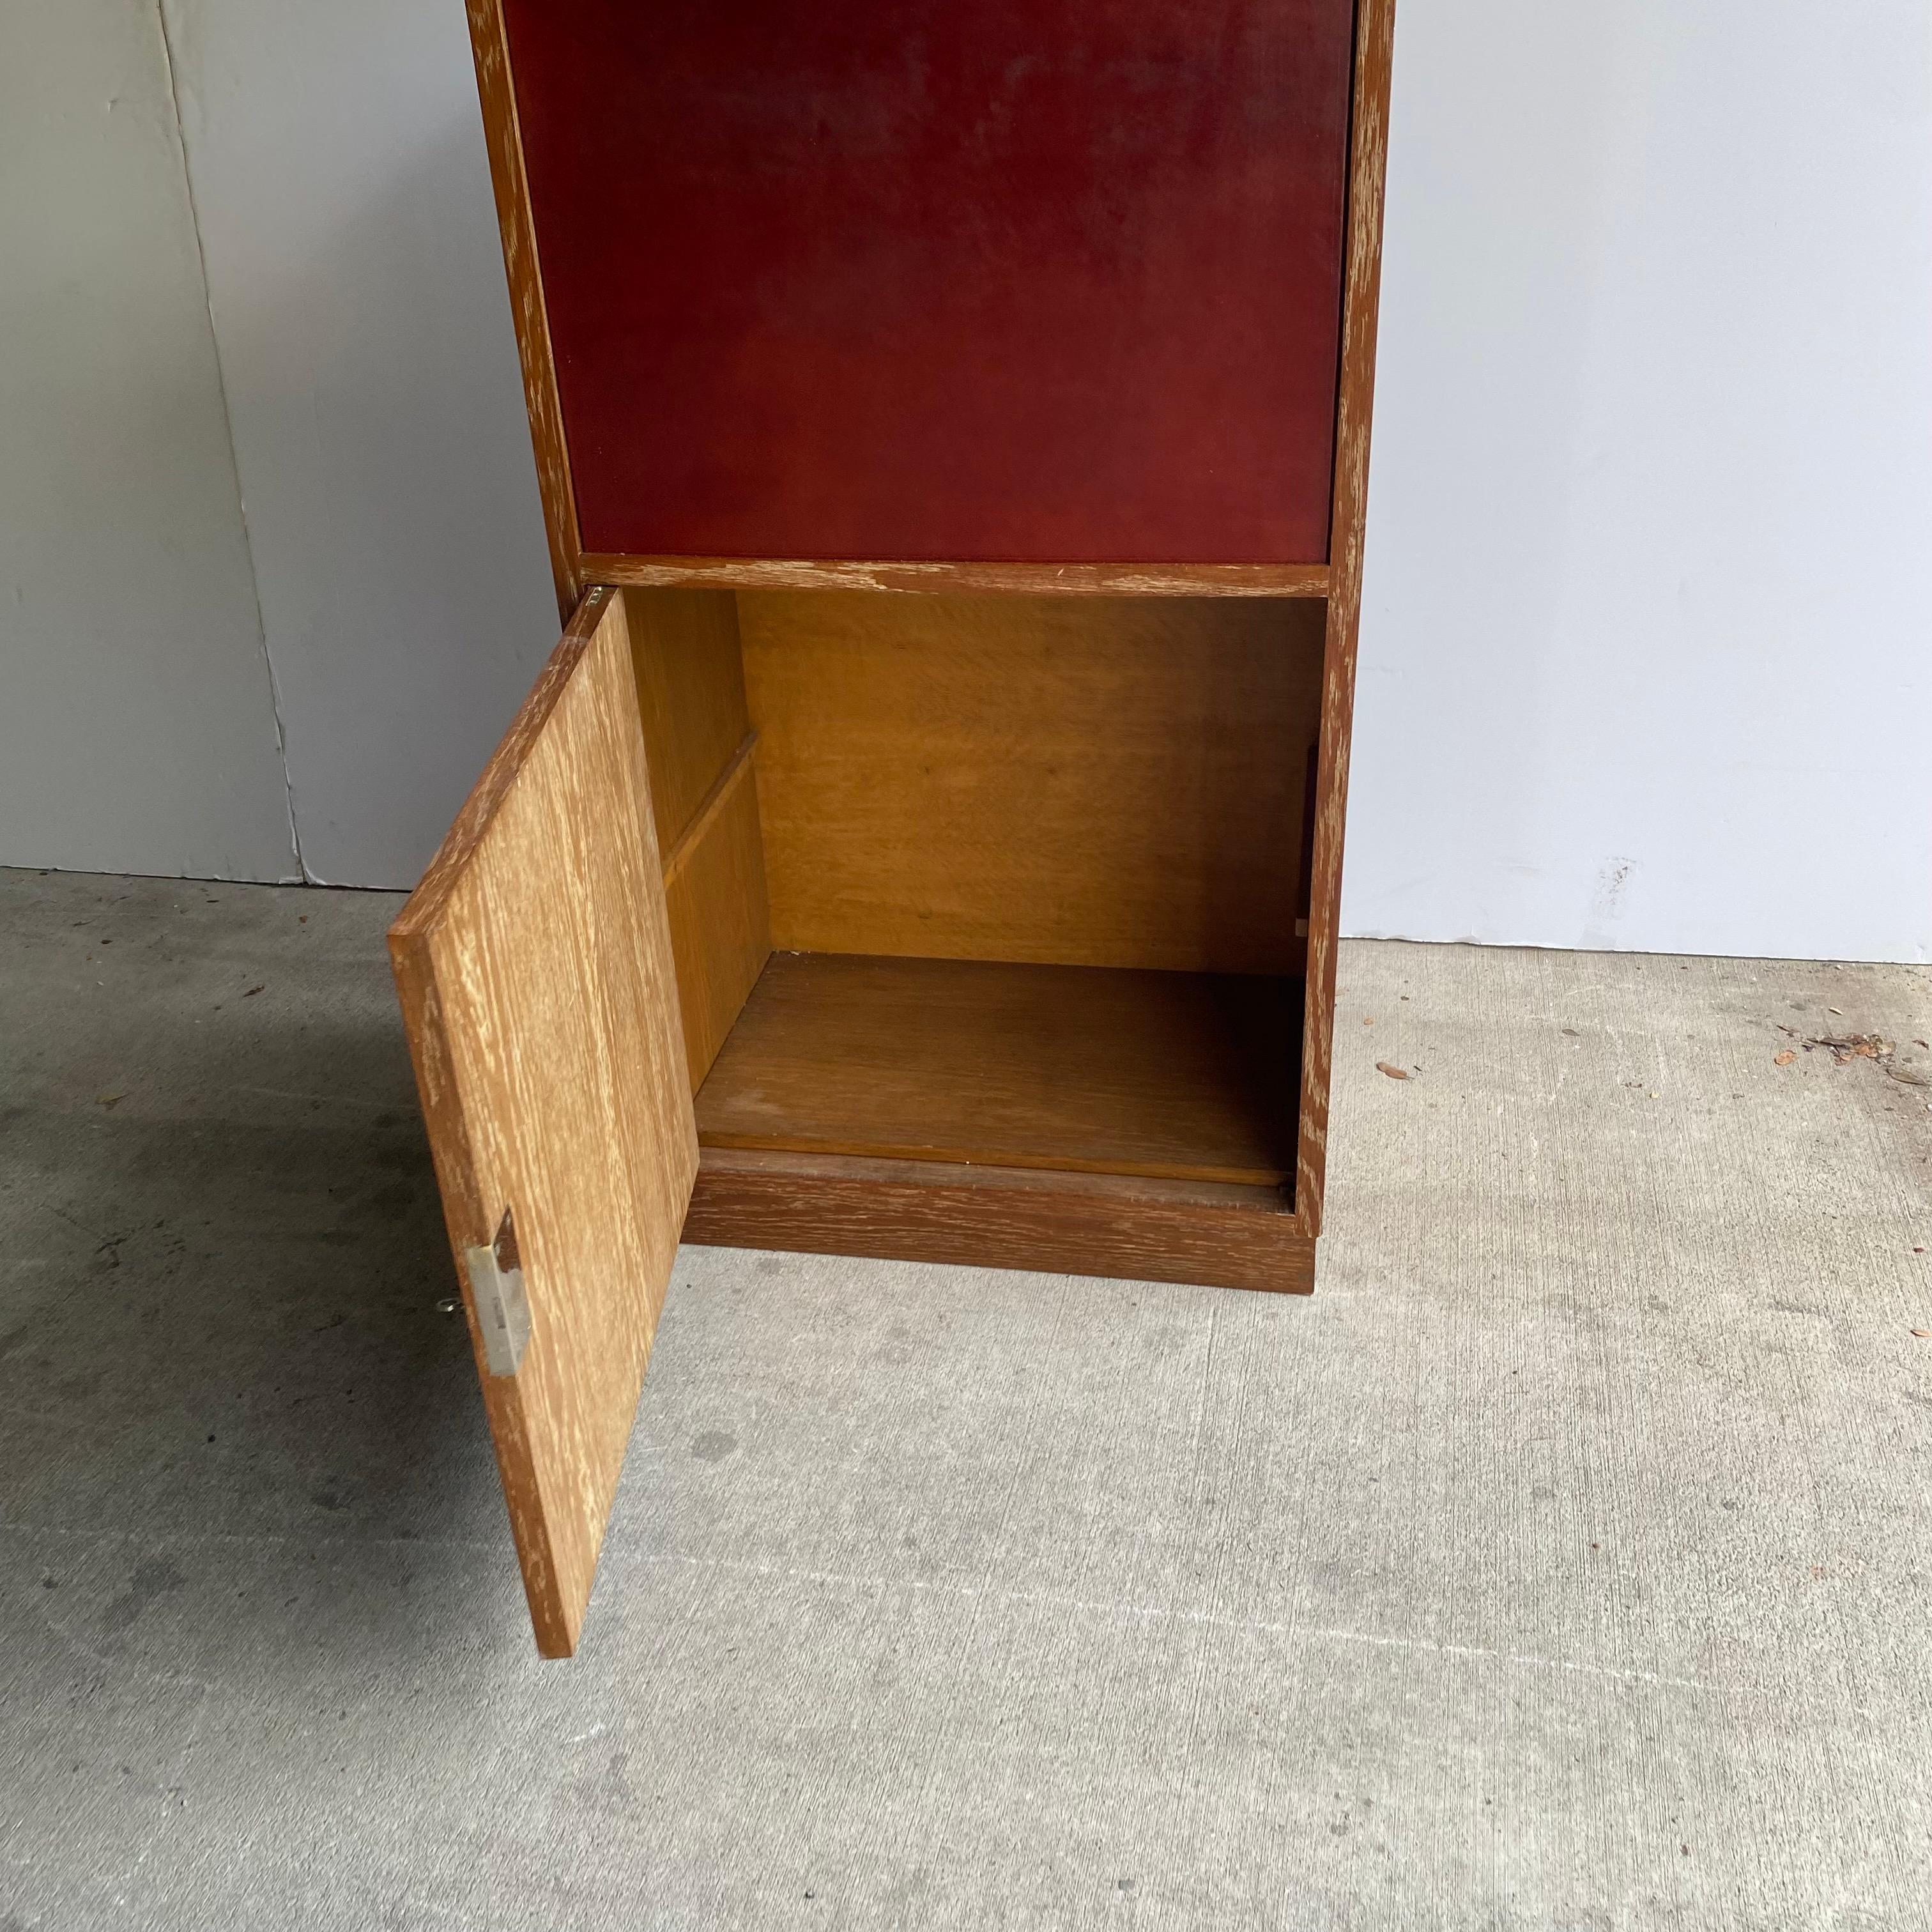 Cerused oak cabinet with oxblood leather-fronted door that drops down to expose secretary work surface with fitted interior including drawers. Heavy cast hardware and key. A sublime example of early modernist work by Charles Dudouyt. France, 1930's.